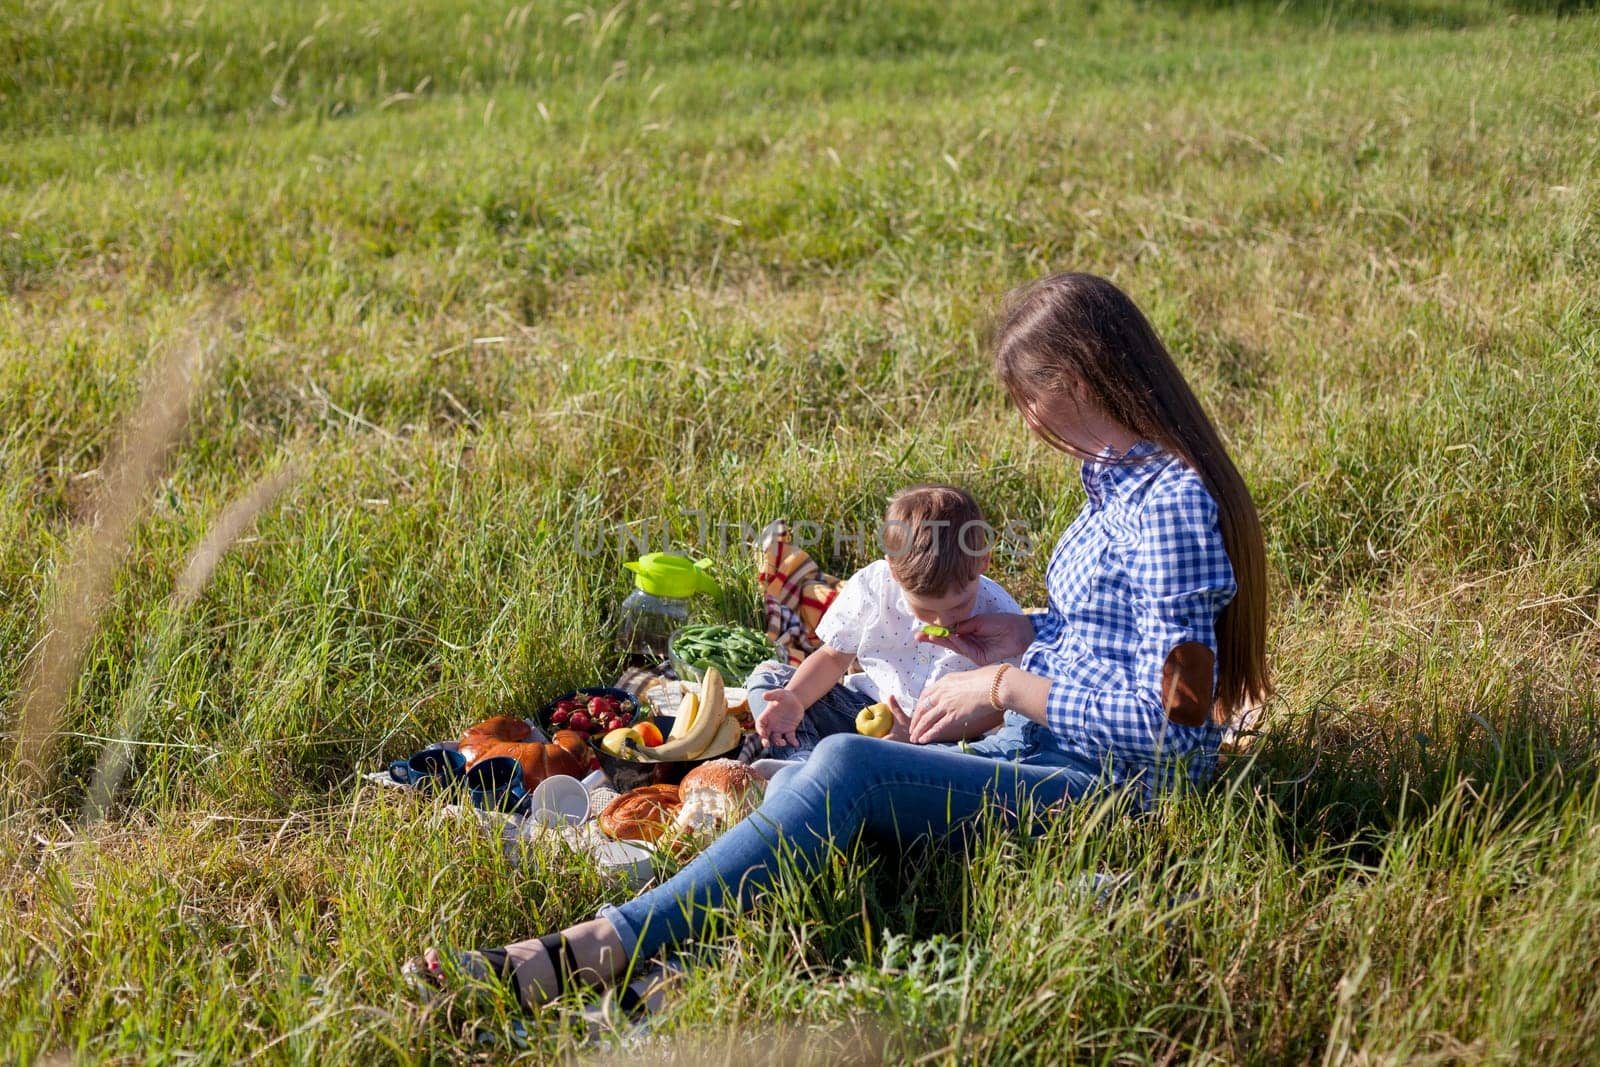 mom with her son on a picnic rest in nature